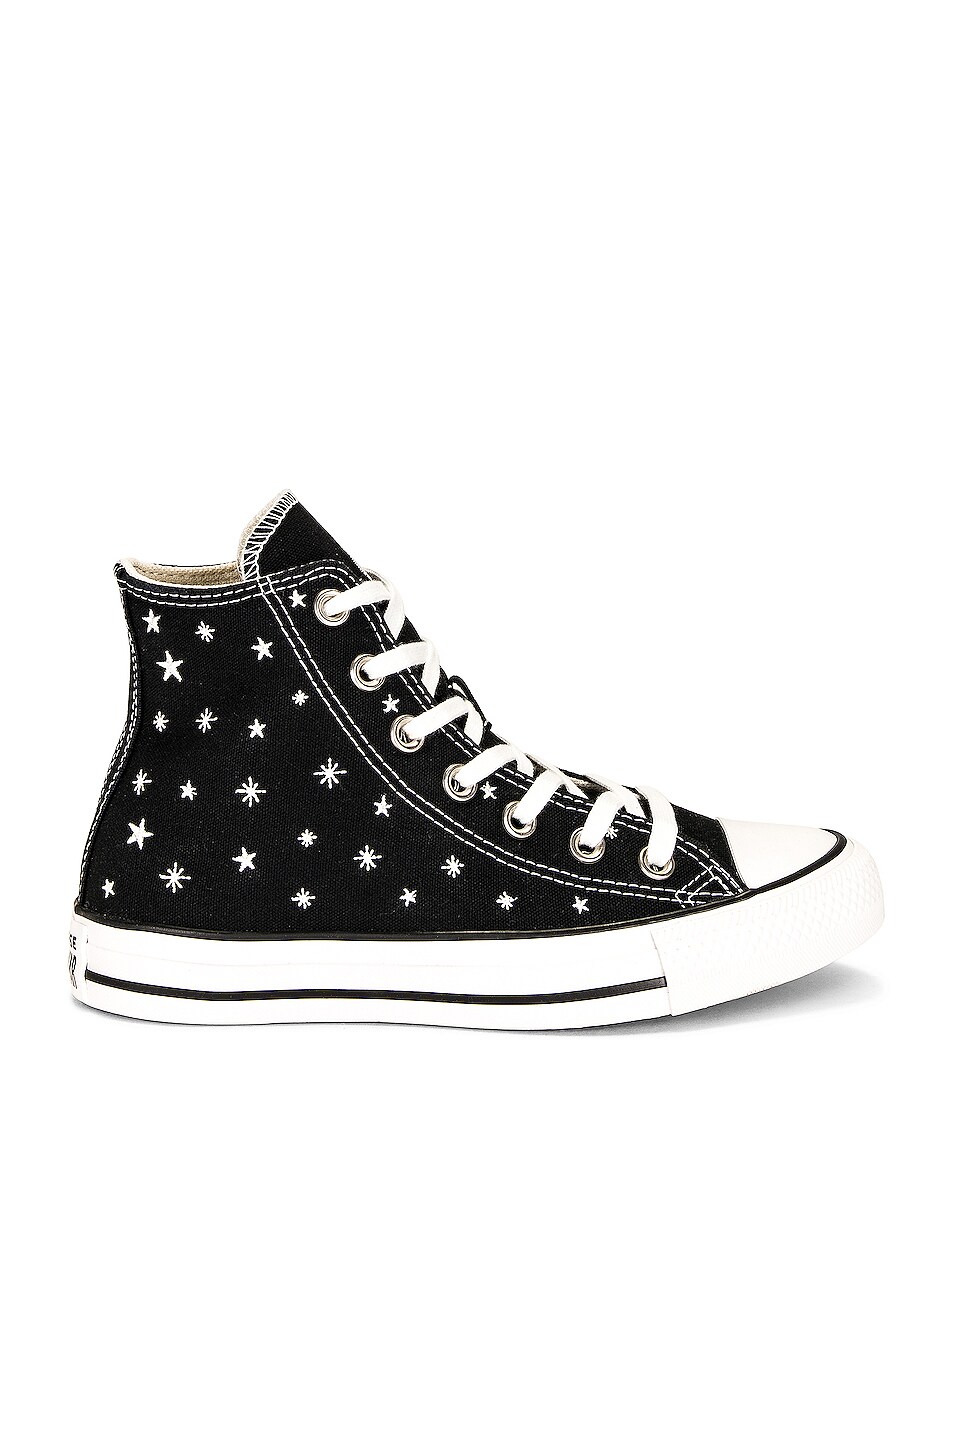 Image 1 of Converse Chuck Taylor All Star in Black, Egret, & Vintage White